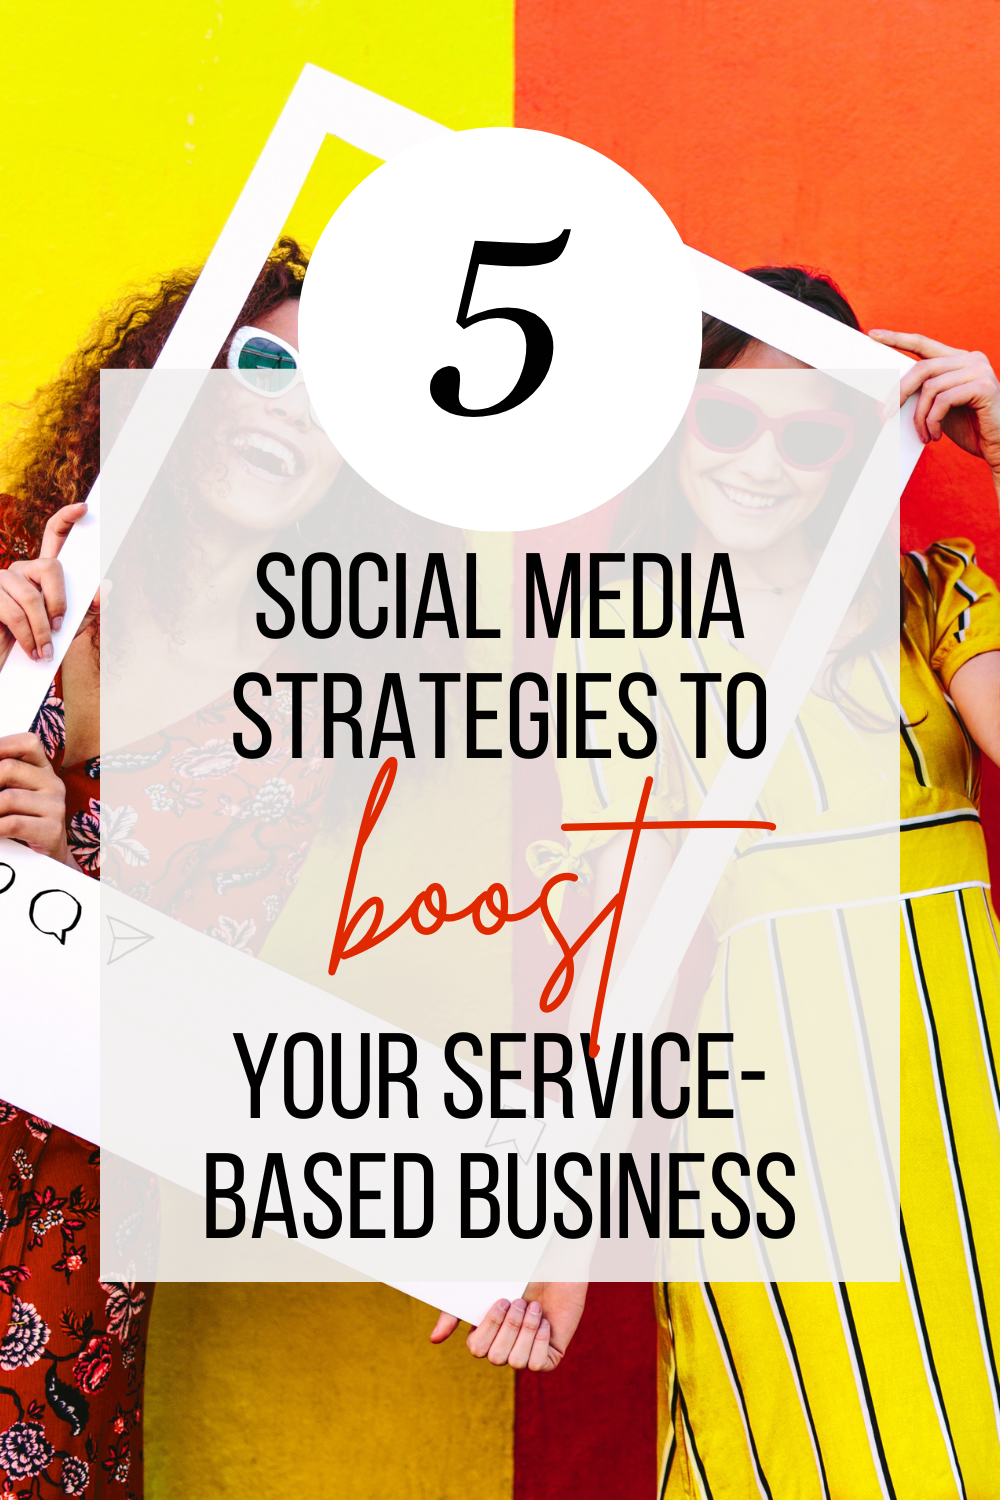 How to Transform Your Service-Based Business with Effective Social Media Marketing